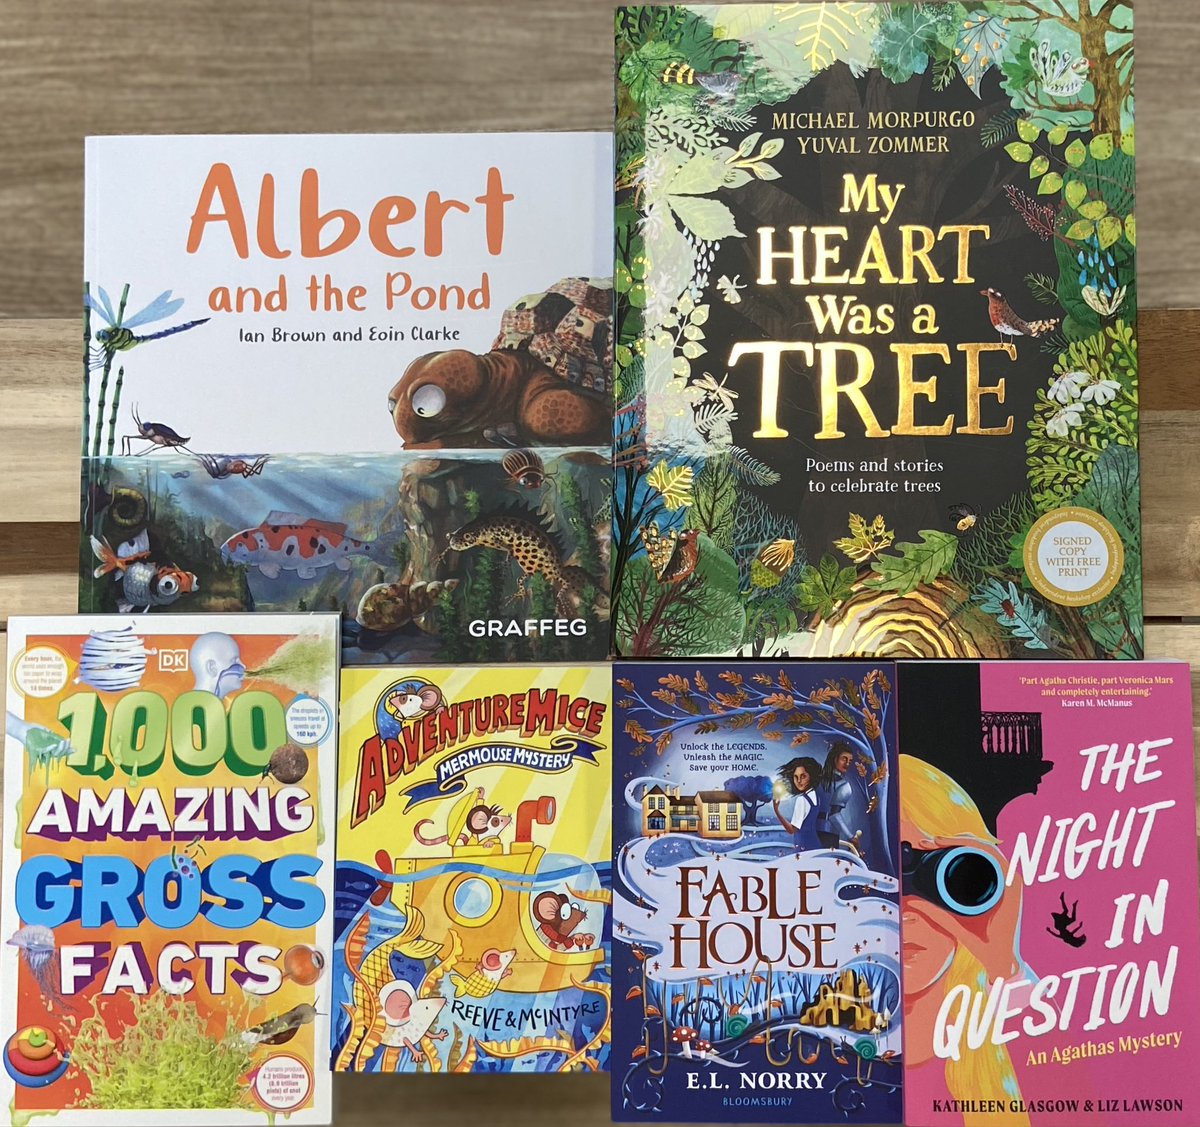 New books for children and teens - 
Albert the tortoise, Michael Morpurgo and Yuval Zommer with poems celebrating trees, gross facts, a new adventure for Philip Reeve and Sarah McIntyre’s AdventureMice, 
Arthurian adventure in Fable House, and a new case for The Agathas.